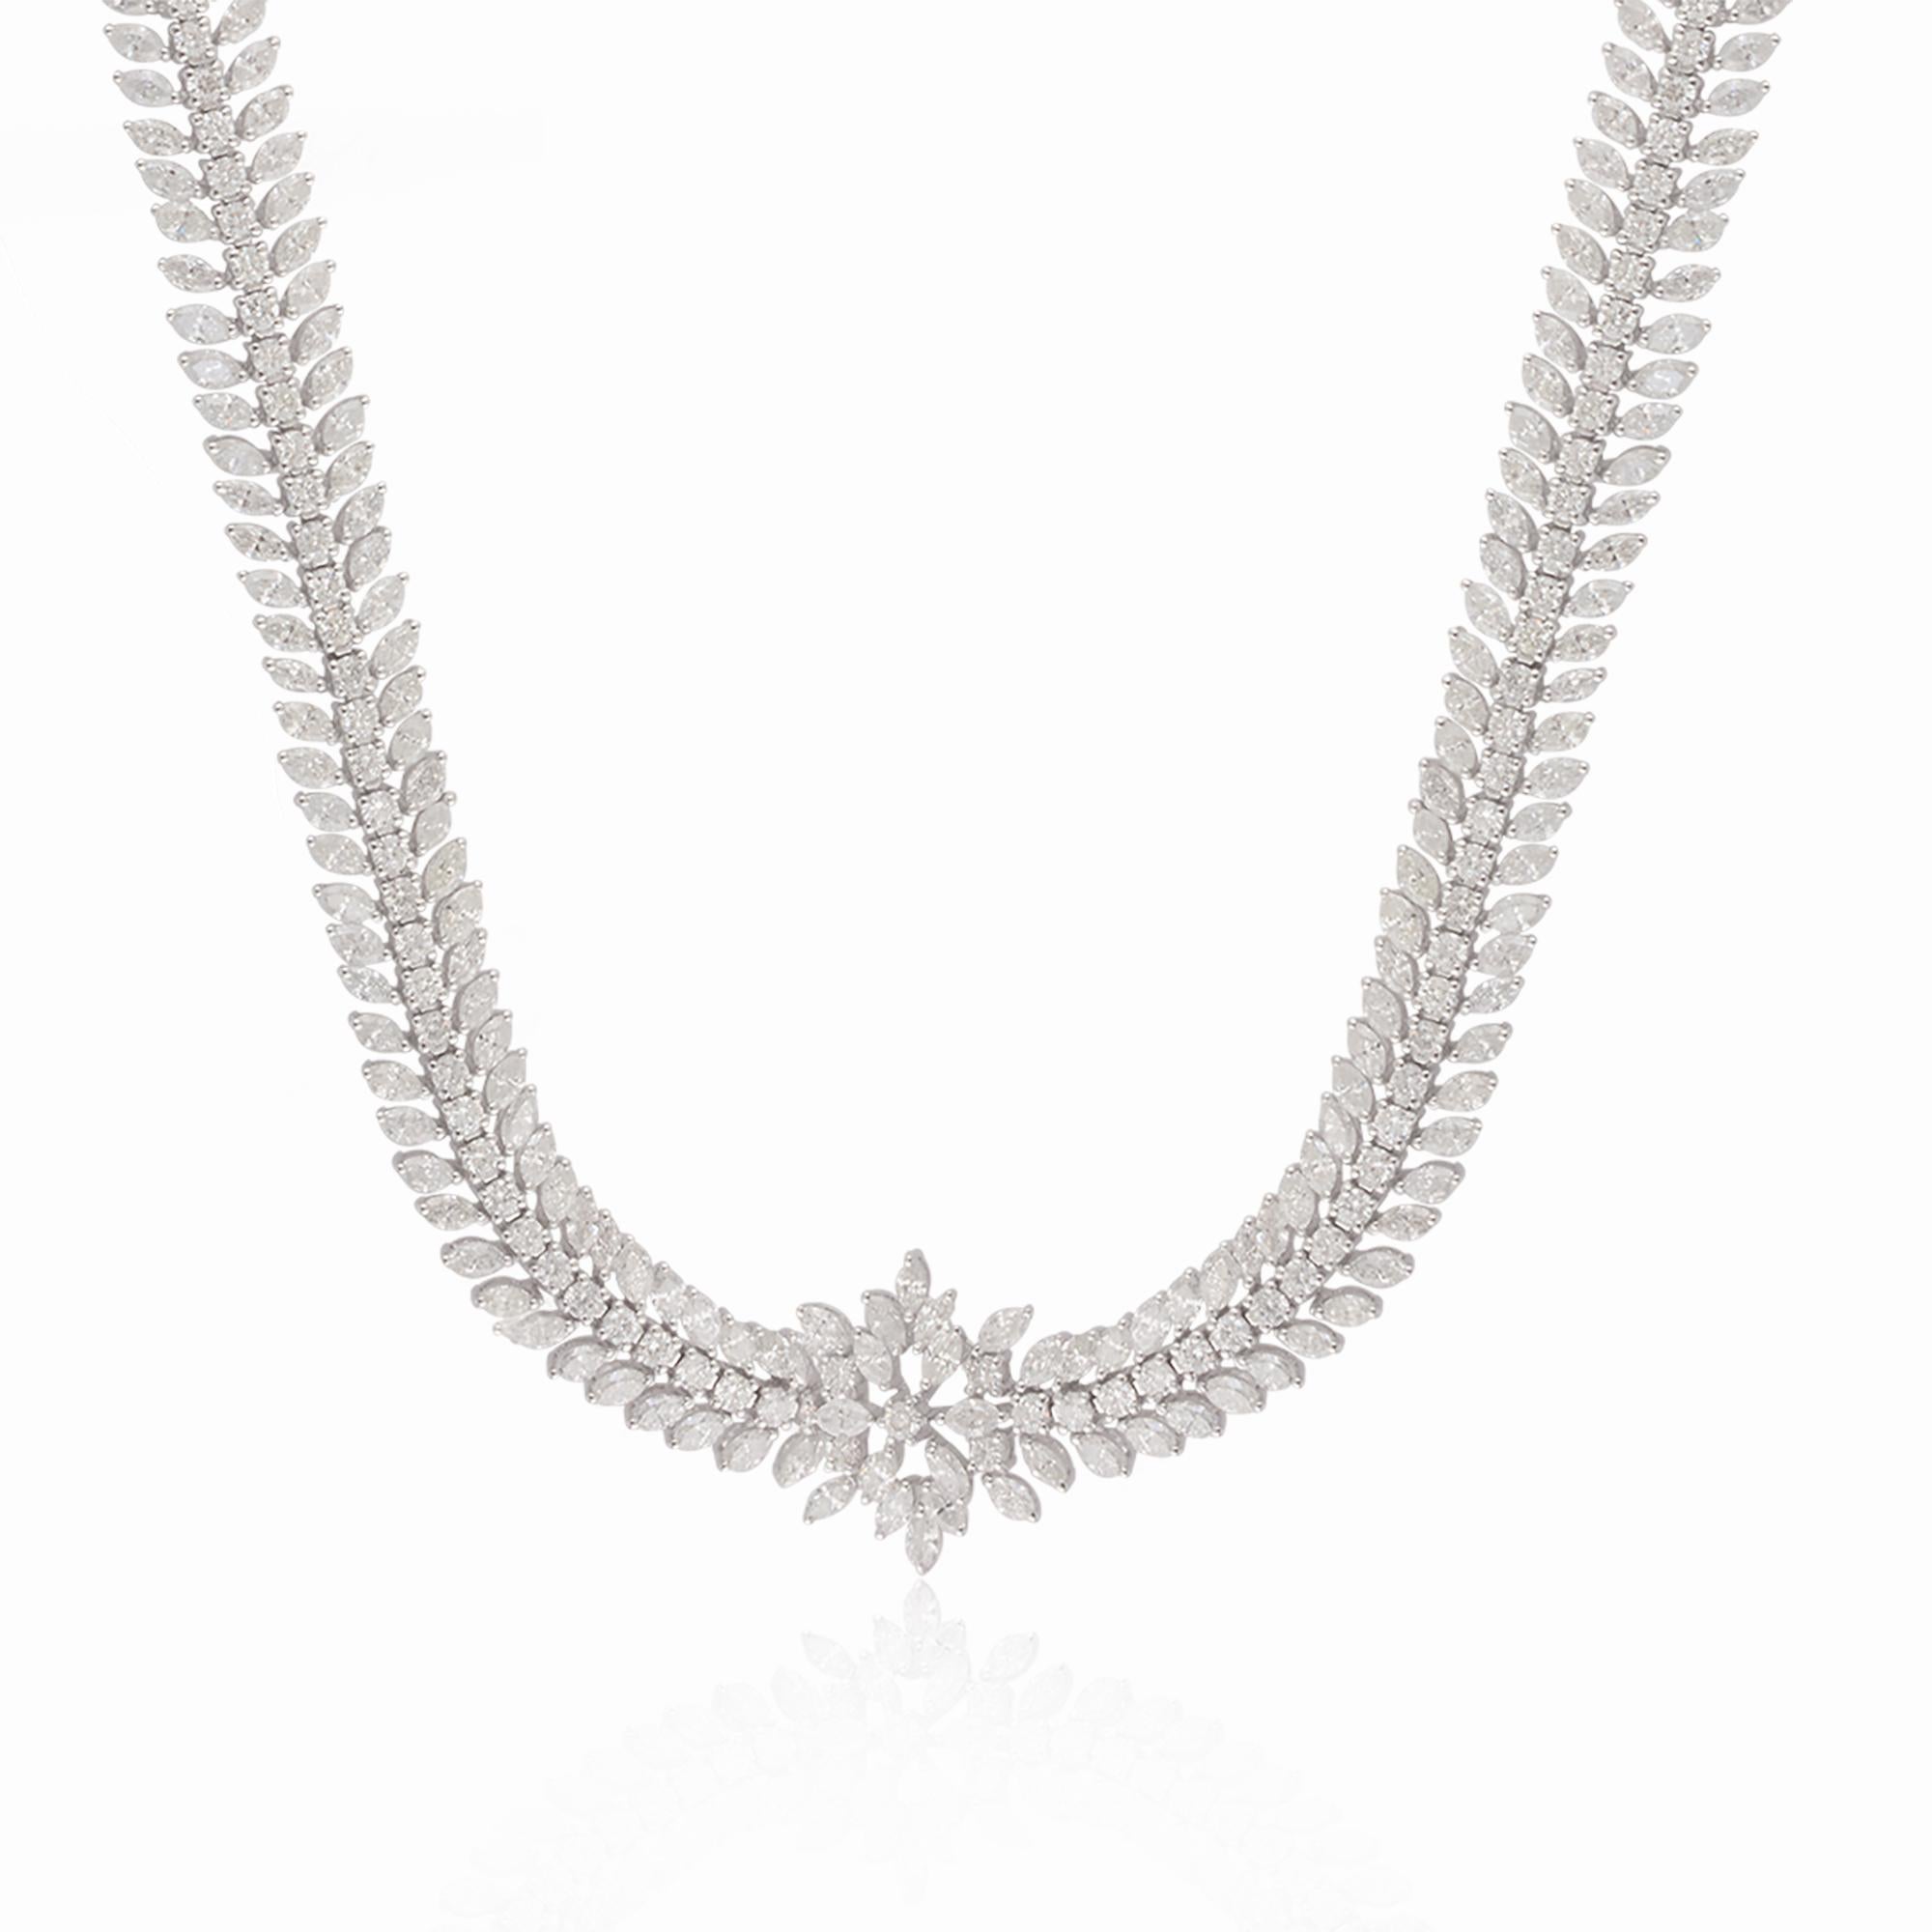 This stunning necklace features a combination of marquise and round diamonds, totaling 12.50 carats, set in exquisite 18 karat white gold. The marquise diamonds, with their elegant and elongated shape, create a sense of sophistication, while the